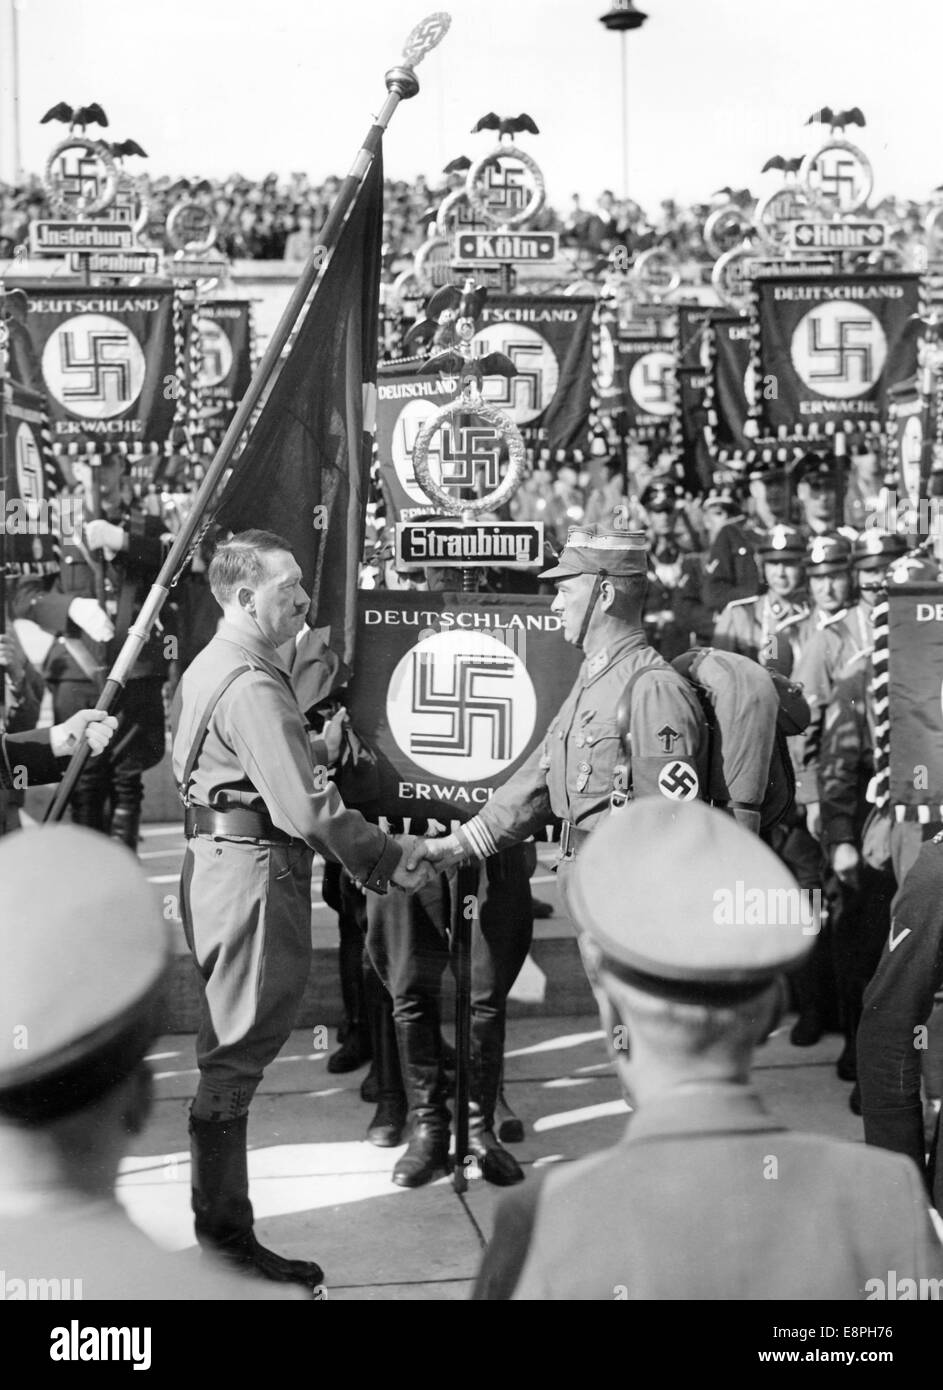 Nuremberg Rally 1936 in Nuremberg, Germany - Adolf Hitler consecrates the new standards with the 'Blood Flag' during the roll call of the Sturmtruppe (SA), Schutzstaffel (SS) and National Socialist Motor Corps (NSKK). New standards of SA and SS were 'consecrated' by touching them to the 'Blood Flag', which supposedly was carried in the failed Beer Hall Putsch. (Flaws in quality due to the historic picture copy) Fotoarchiv für Zeitgeschichtee - NO WIRE SERVICE - Stock Photo